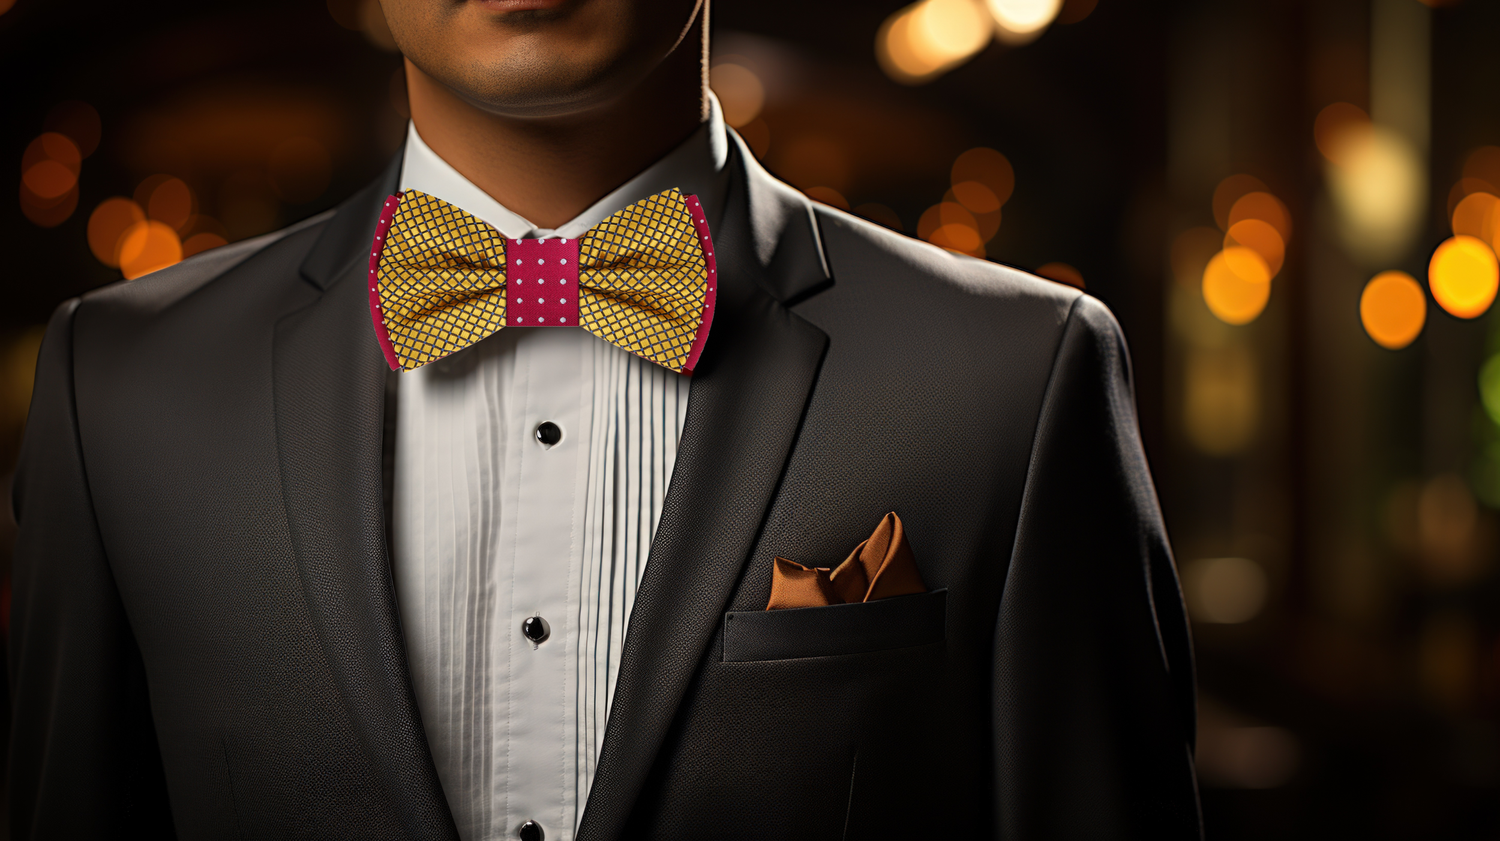 Man Wearing Suit with Gold, Burgundy Bow Tie